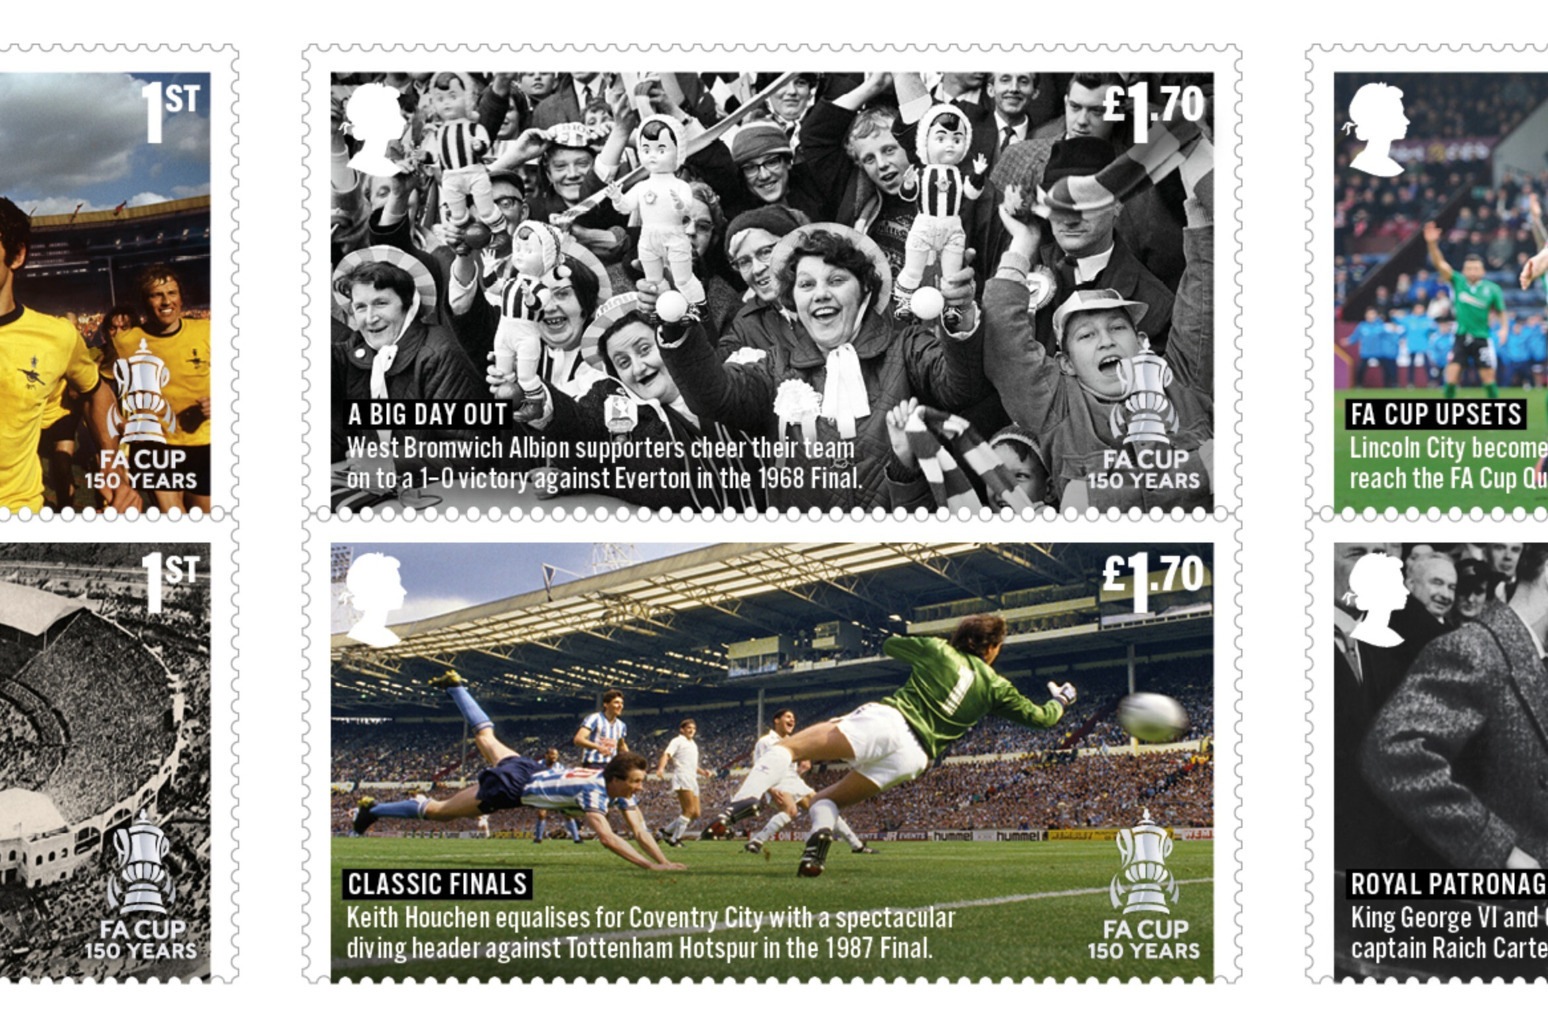 Royal Mail celebrates FA Cups 150th anniversary with special stamps